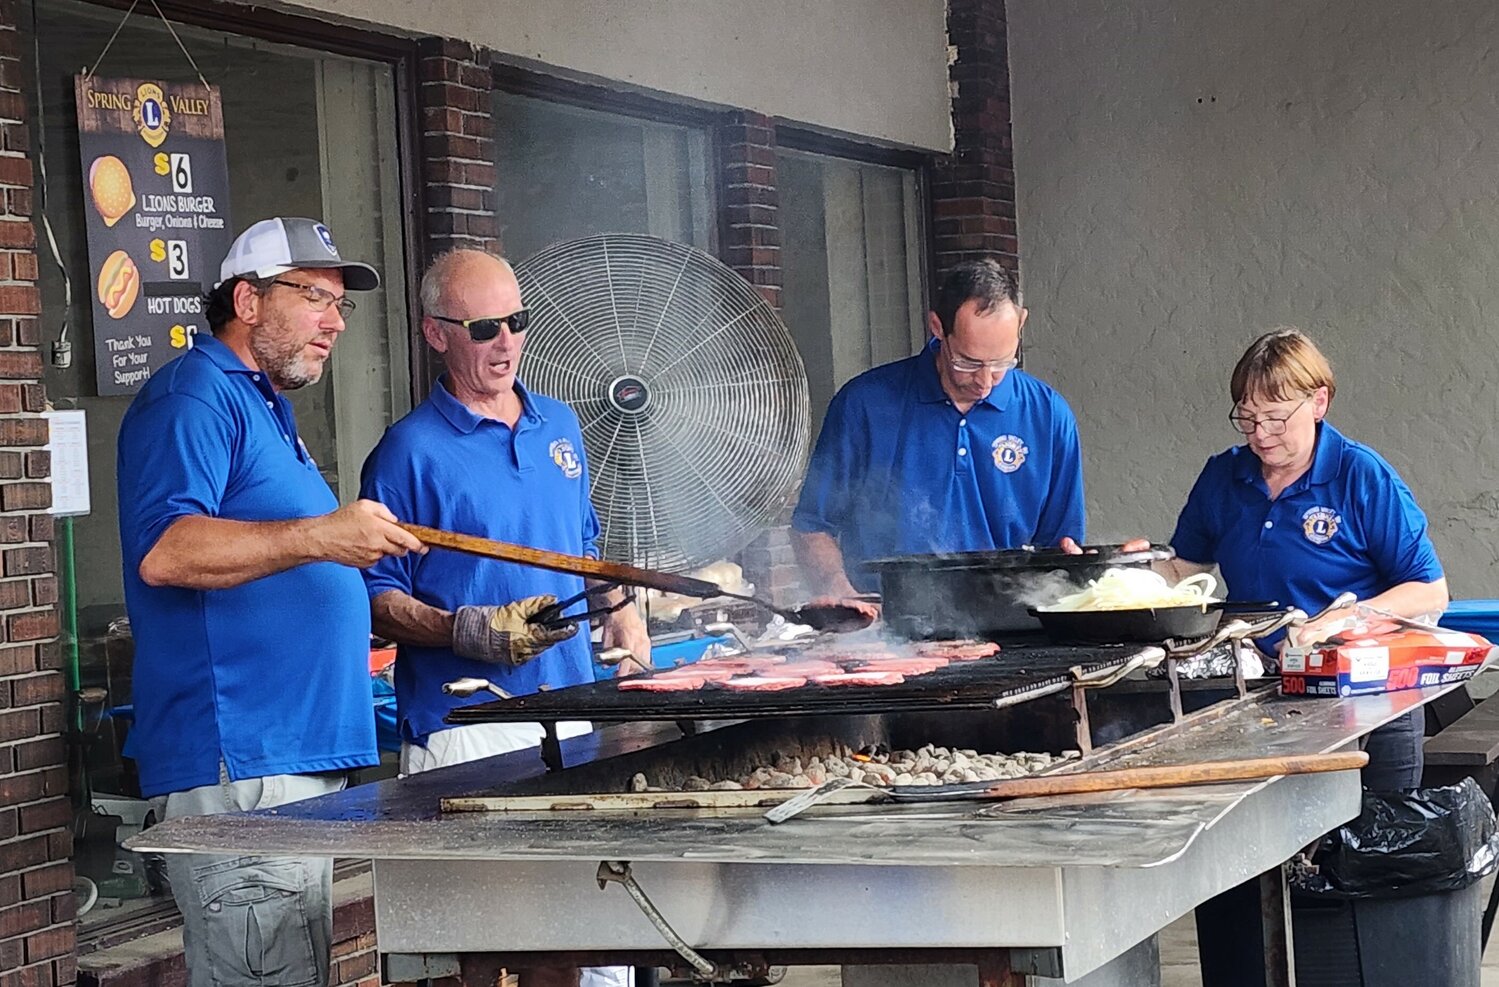 The Spring Valley Lions Club members grill up their “world-famous” burgers at last year’s Dam Days celebration.